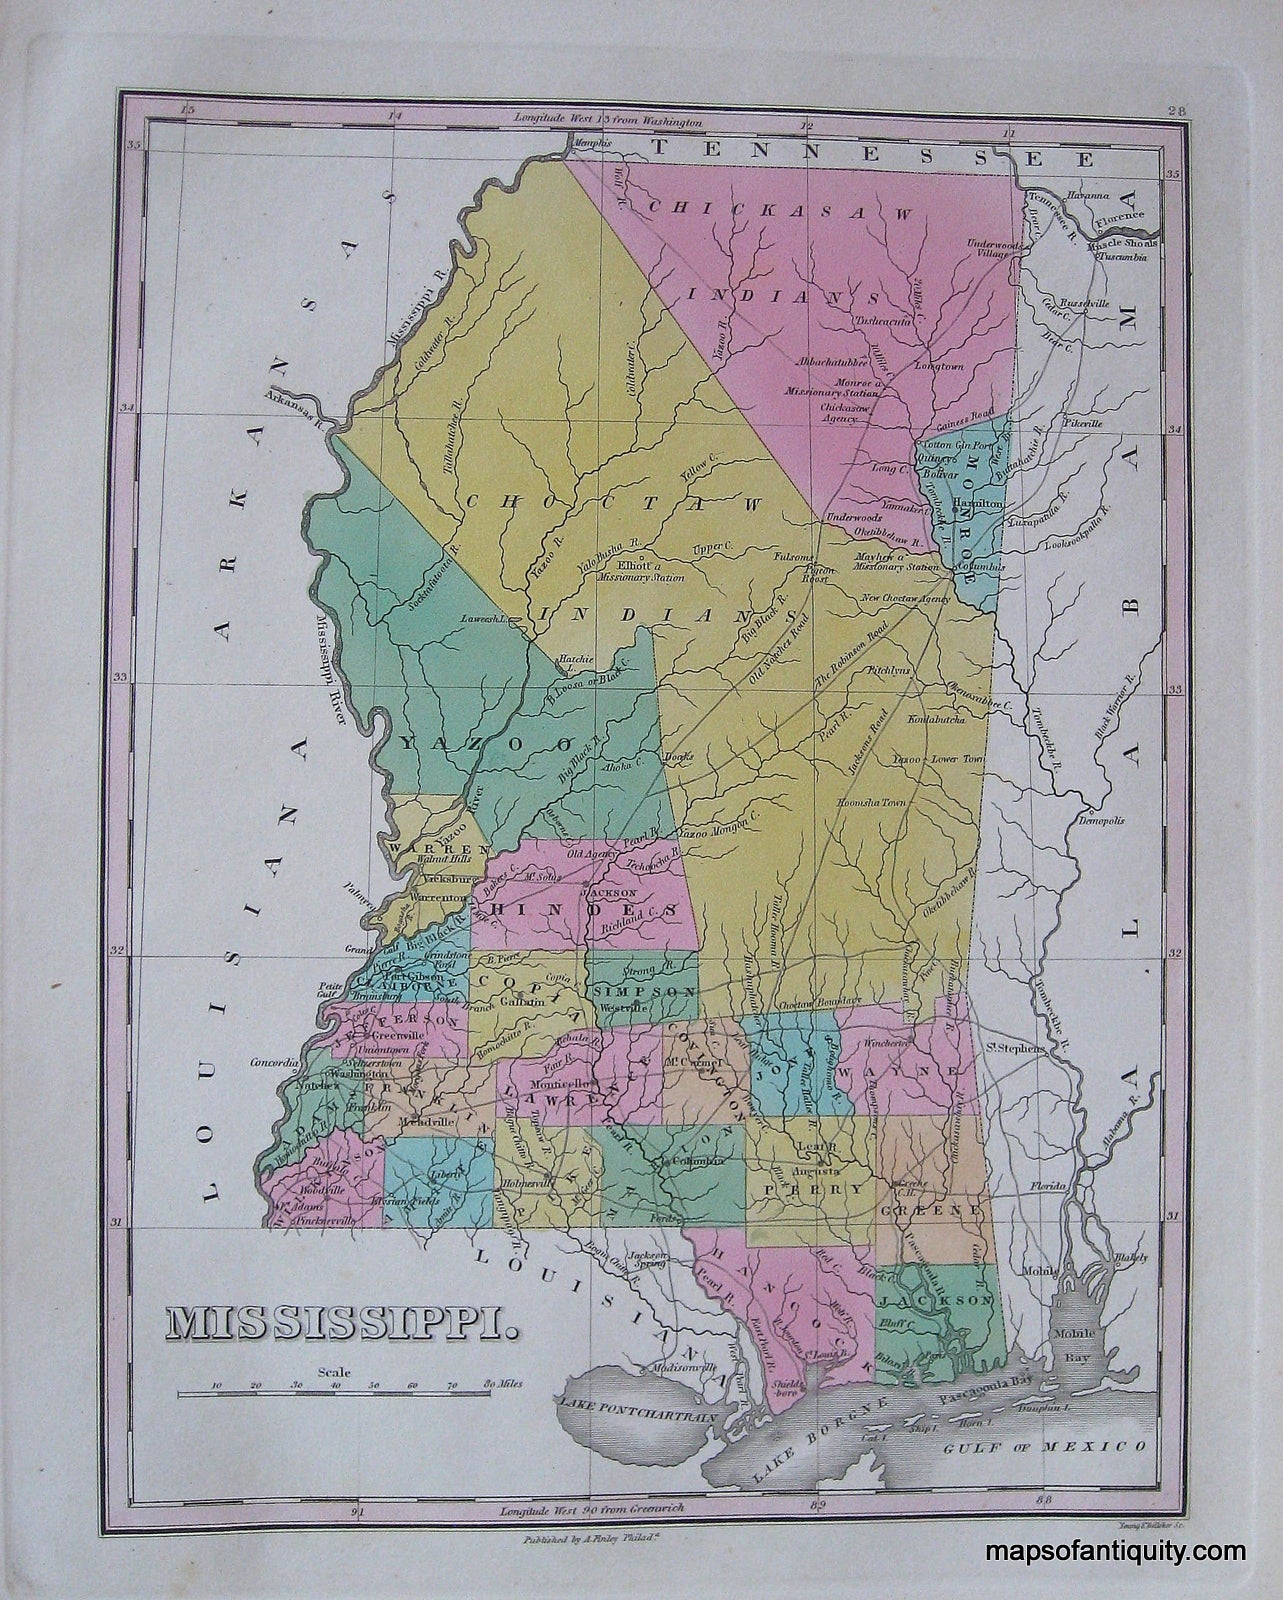 Antique-Hand-Colored-Map-Mississippi.-**********-United-States-South-1826-Anthony-Finley-Maps-Of-Antiquity